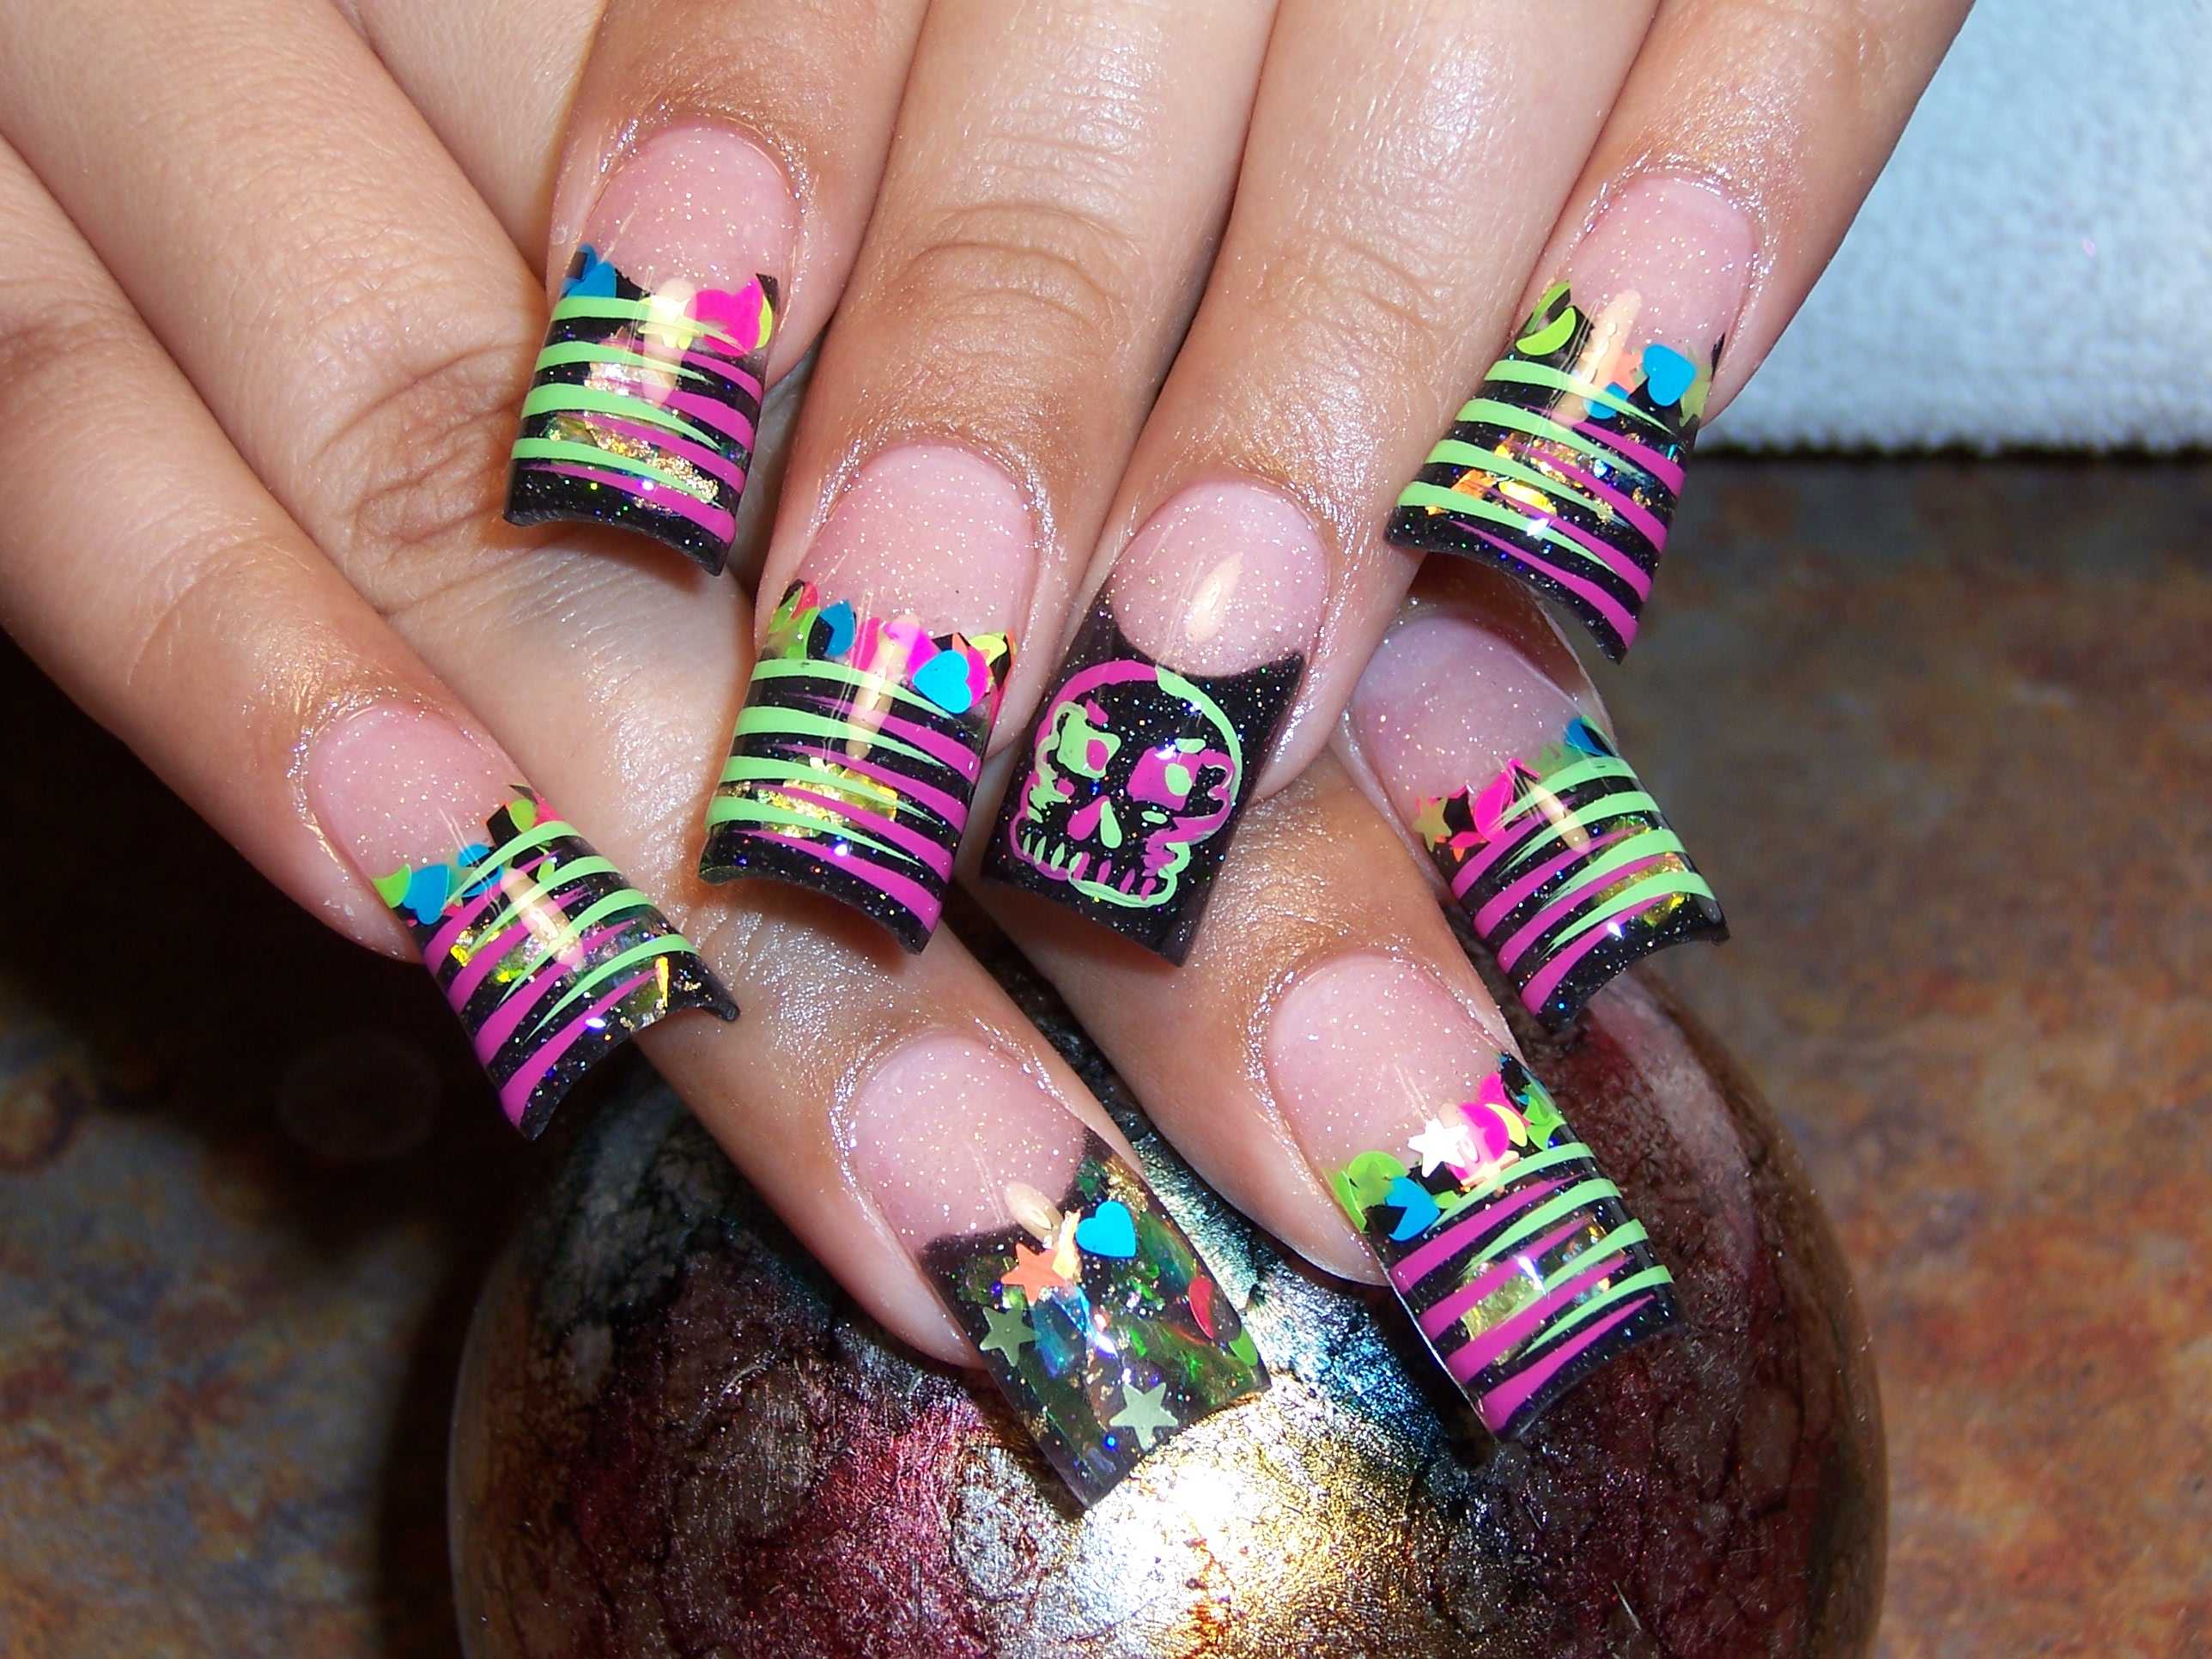 2. Colorful Long Nail Art Ideas - wide 4